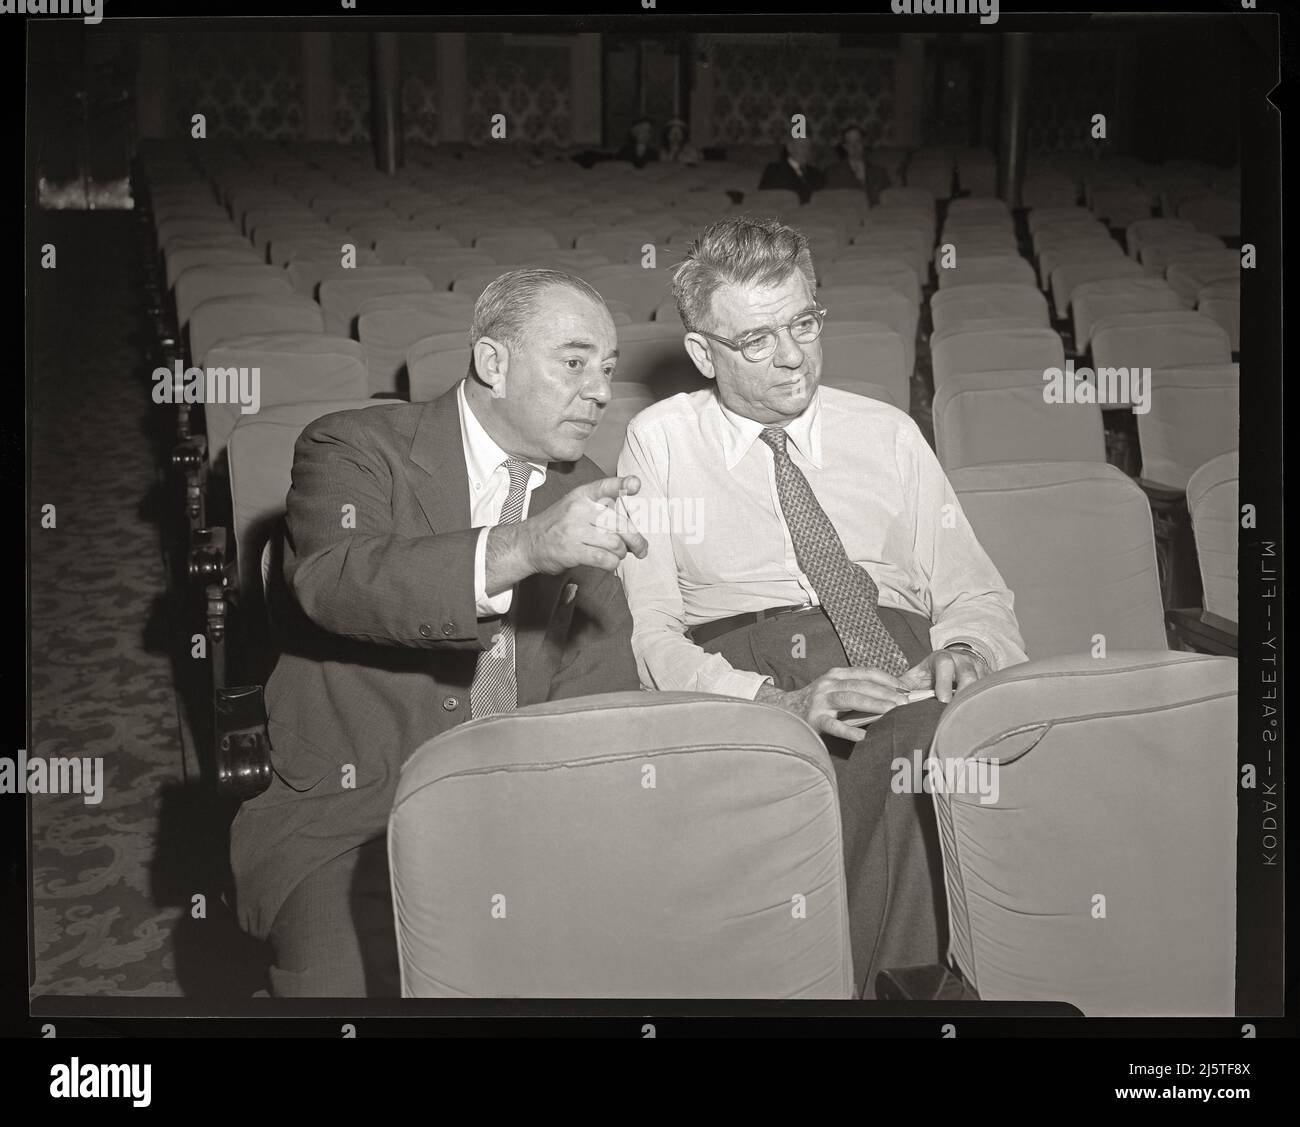 The team of composer Richard Rodgers (left) and lyricist Oscar Hammerstein (right), at dress rehearsal for “Me and Juliet’, Shubert Theater, Chicago, Illinois  April 7, 1954. Image from 4x5 inch negative. Stock Photo